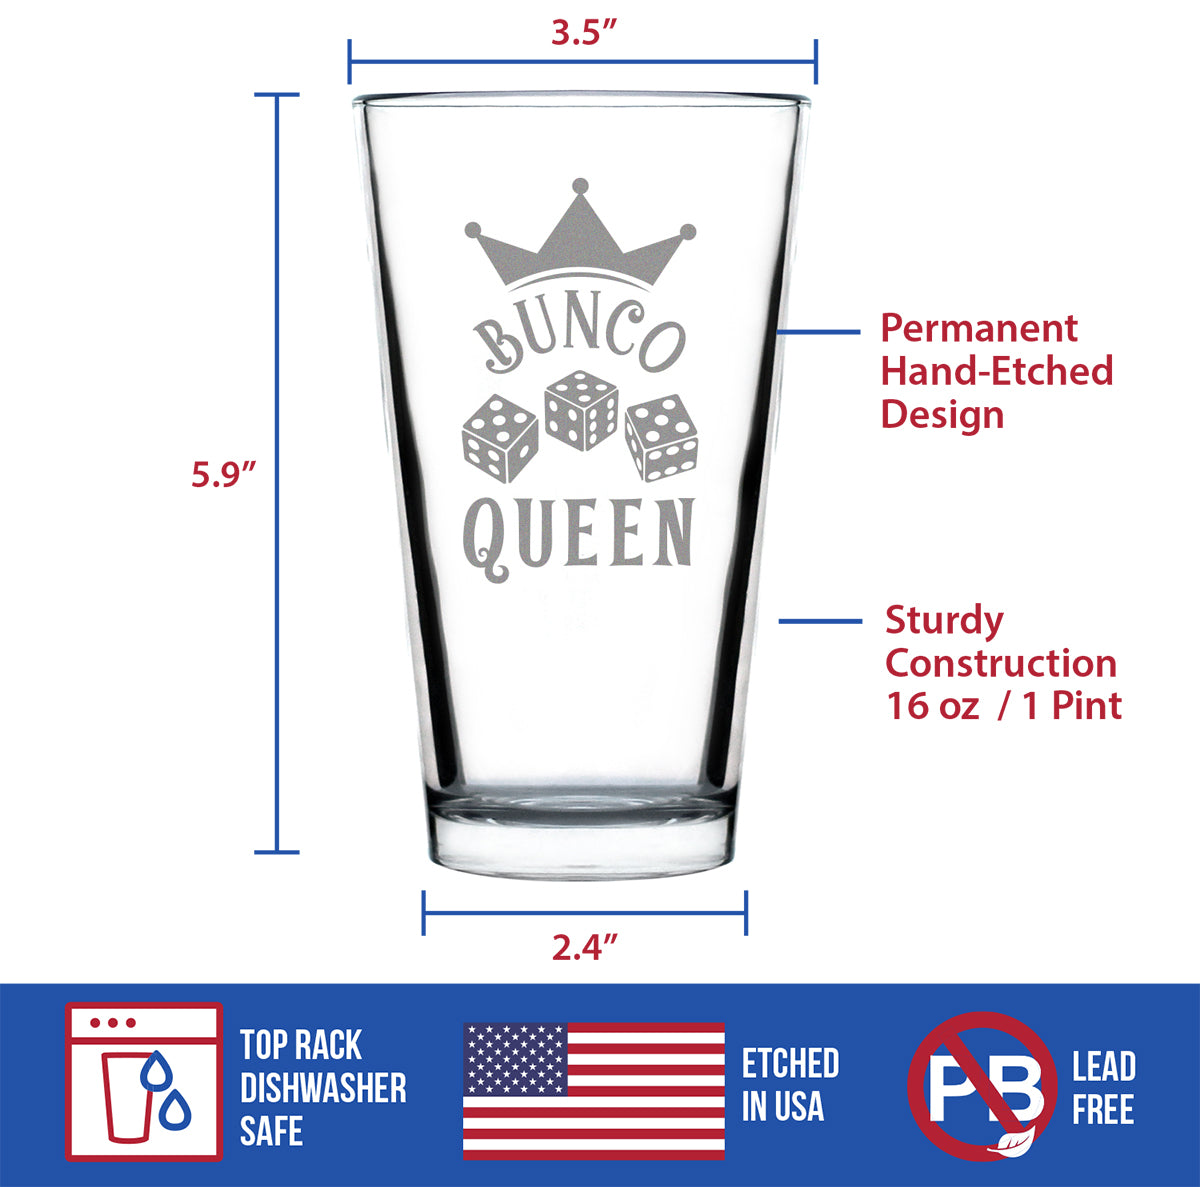 Bunco Queen Pint Glass for Beer - Bunco Decor and Bunco Gifts for Women - 16 Oz Glasses